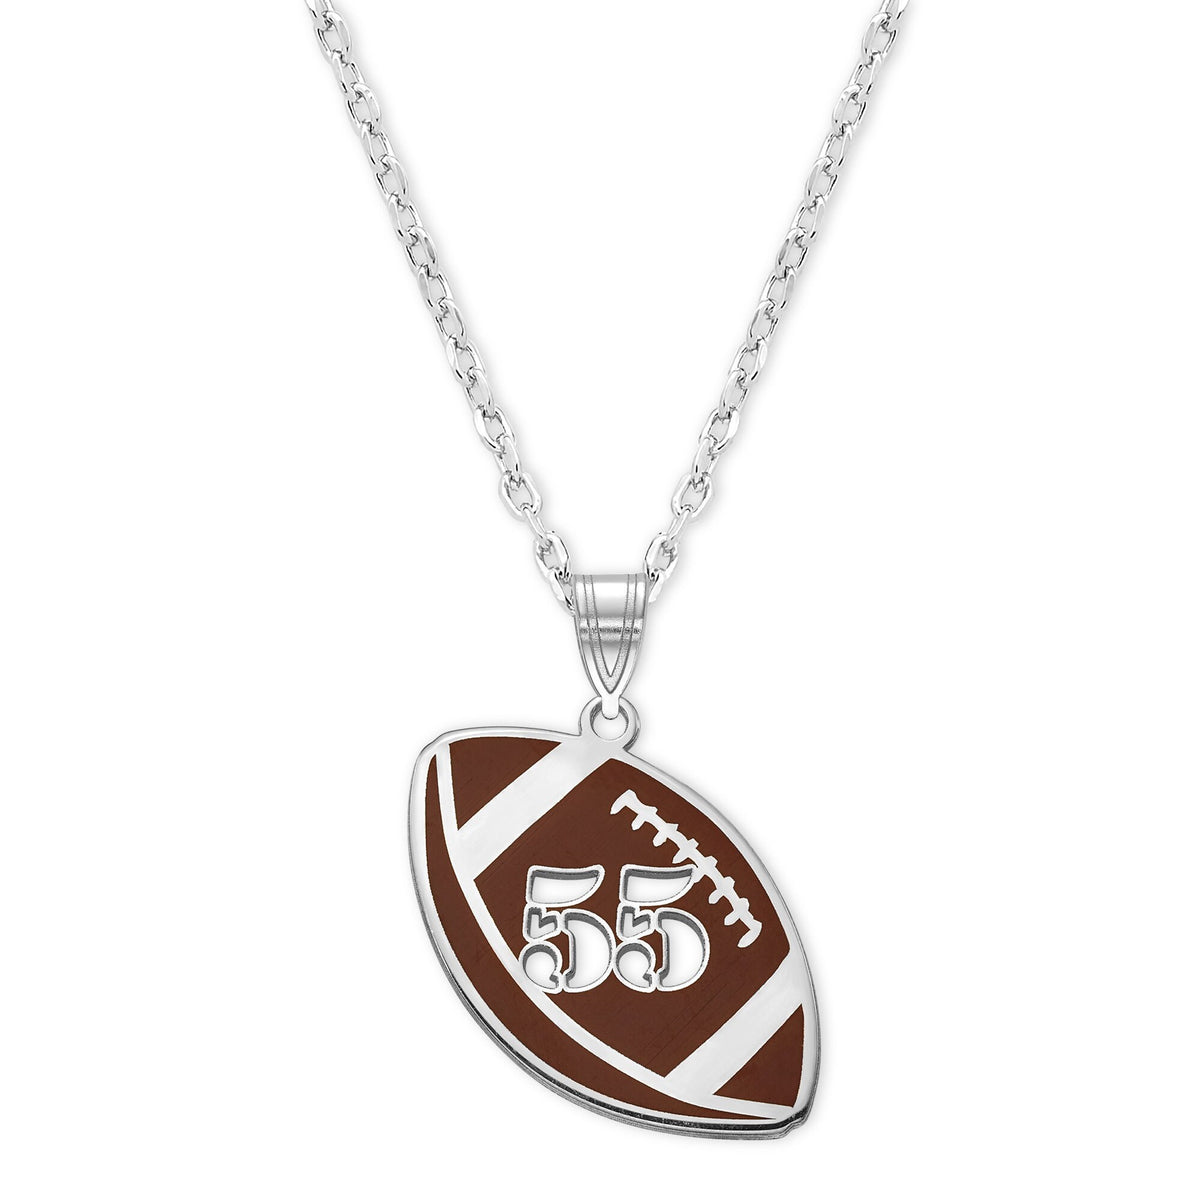 Football Number Cut Out Pendant With Necklace in Sterling Silver , Gold Plated Silver or 10k Gold